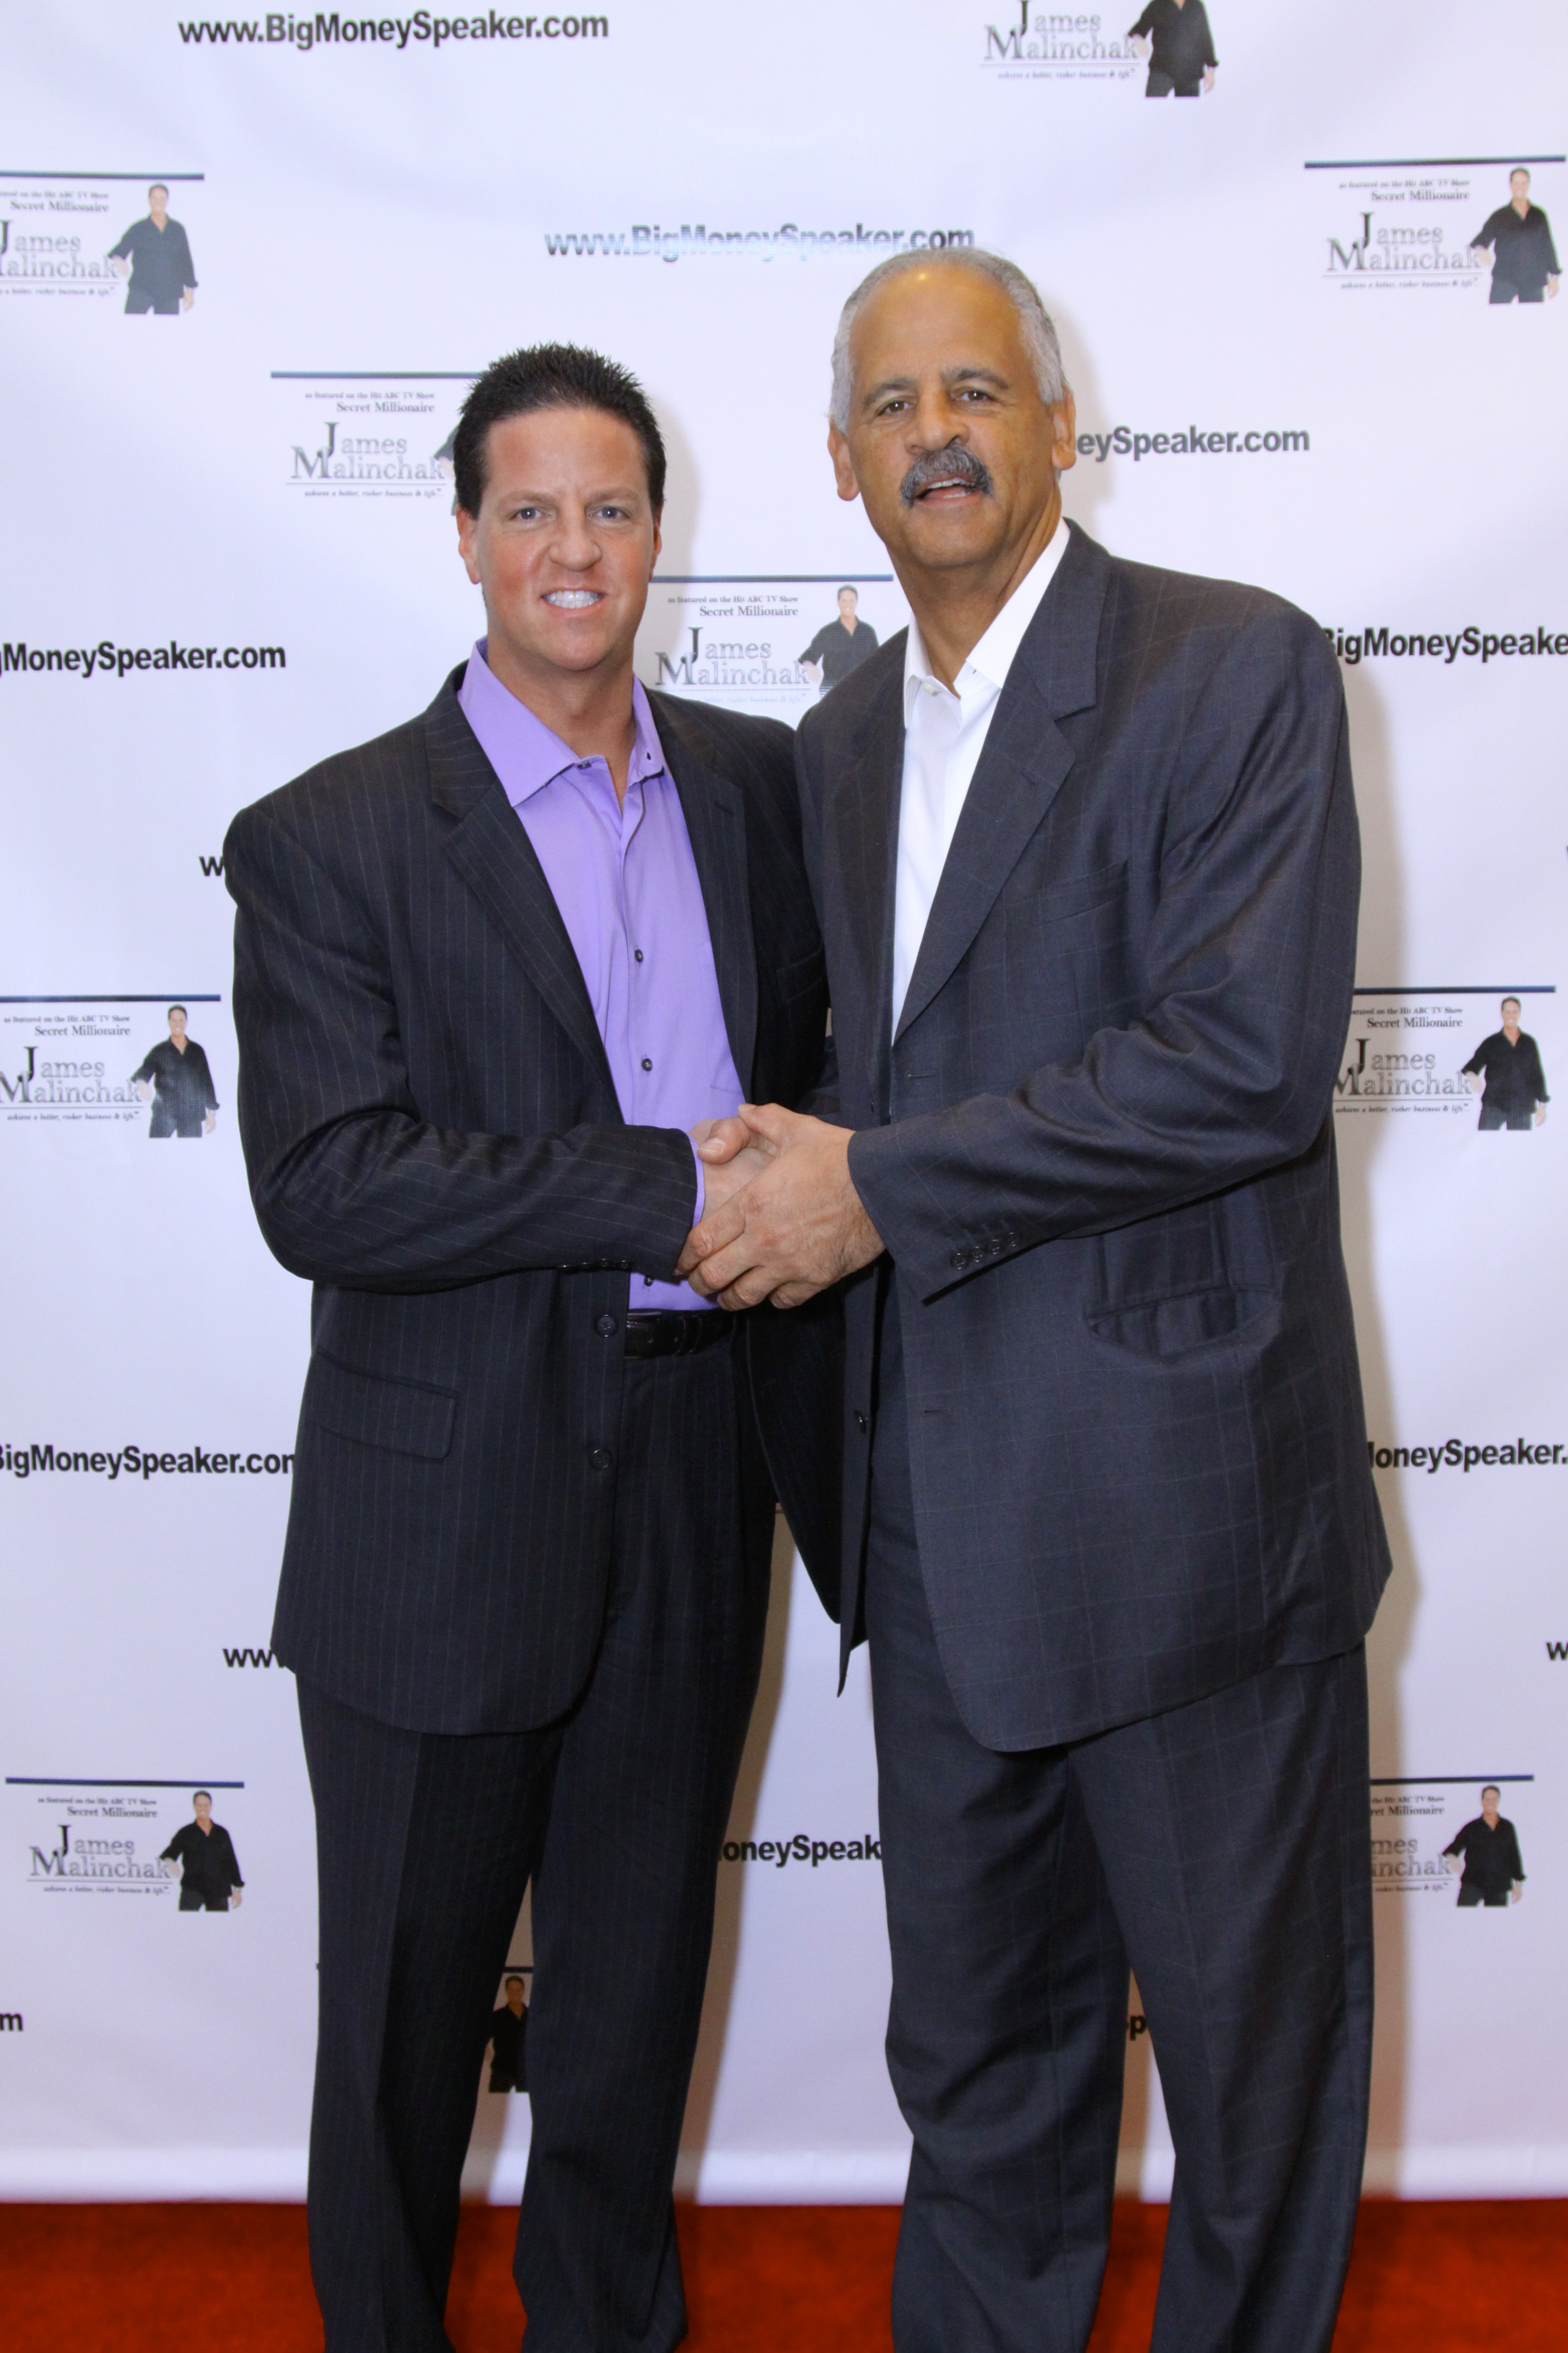 Oprah's Stedman Graham at James Malinchak's Big Money Speaker Boot Camp. James Malinchak, Featured on ABC's Hit TV Show, Secret Millionaire, is one of America's highest-paid, most in-demand motivational and business public speakers.